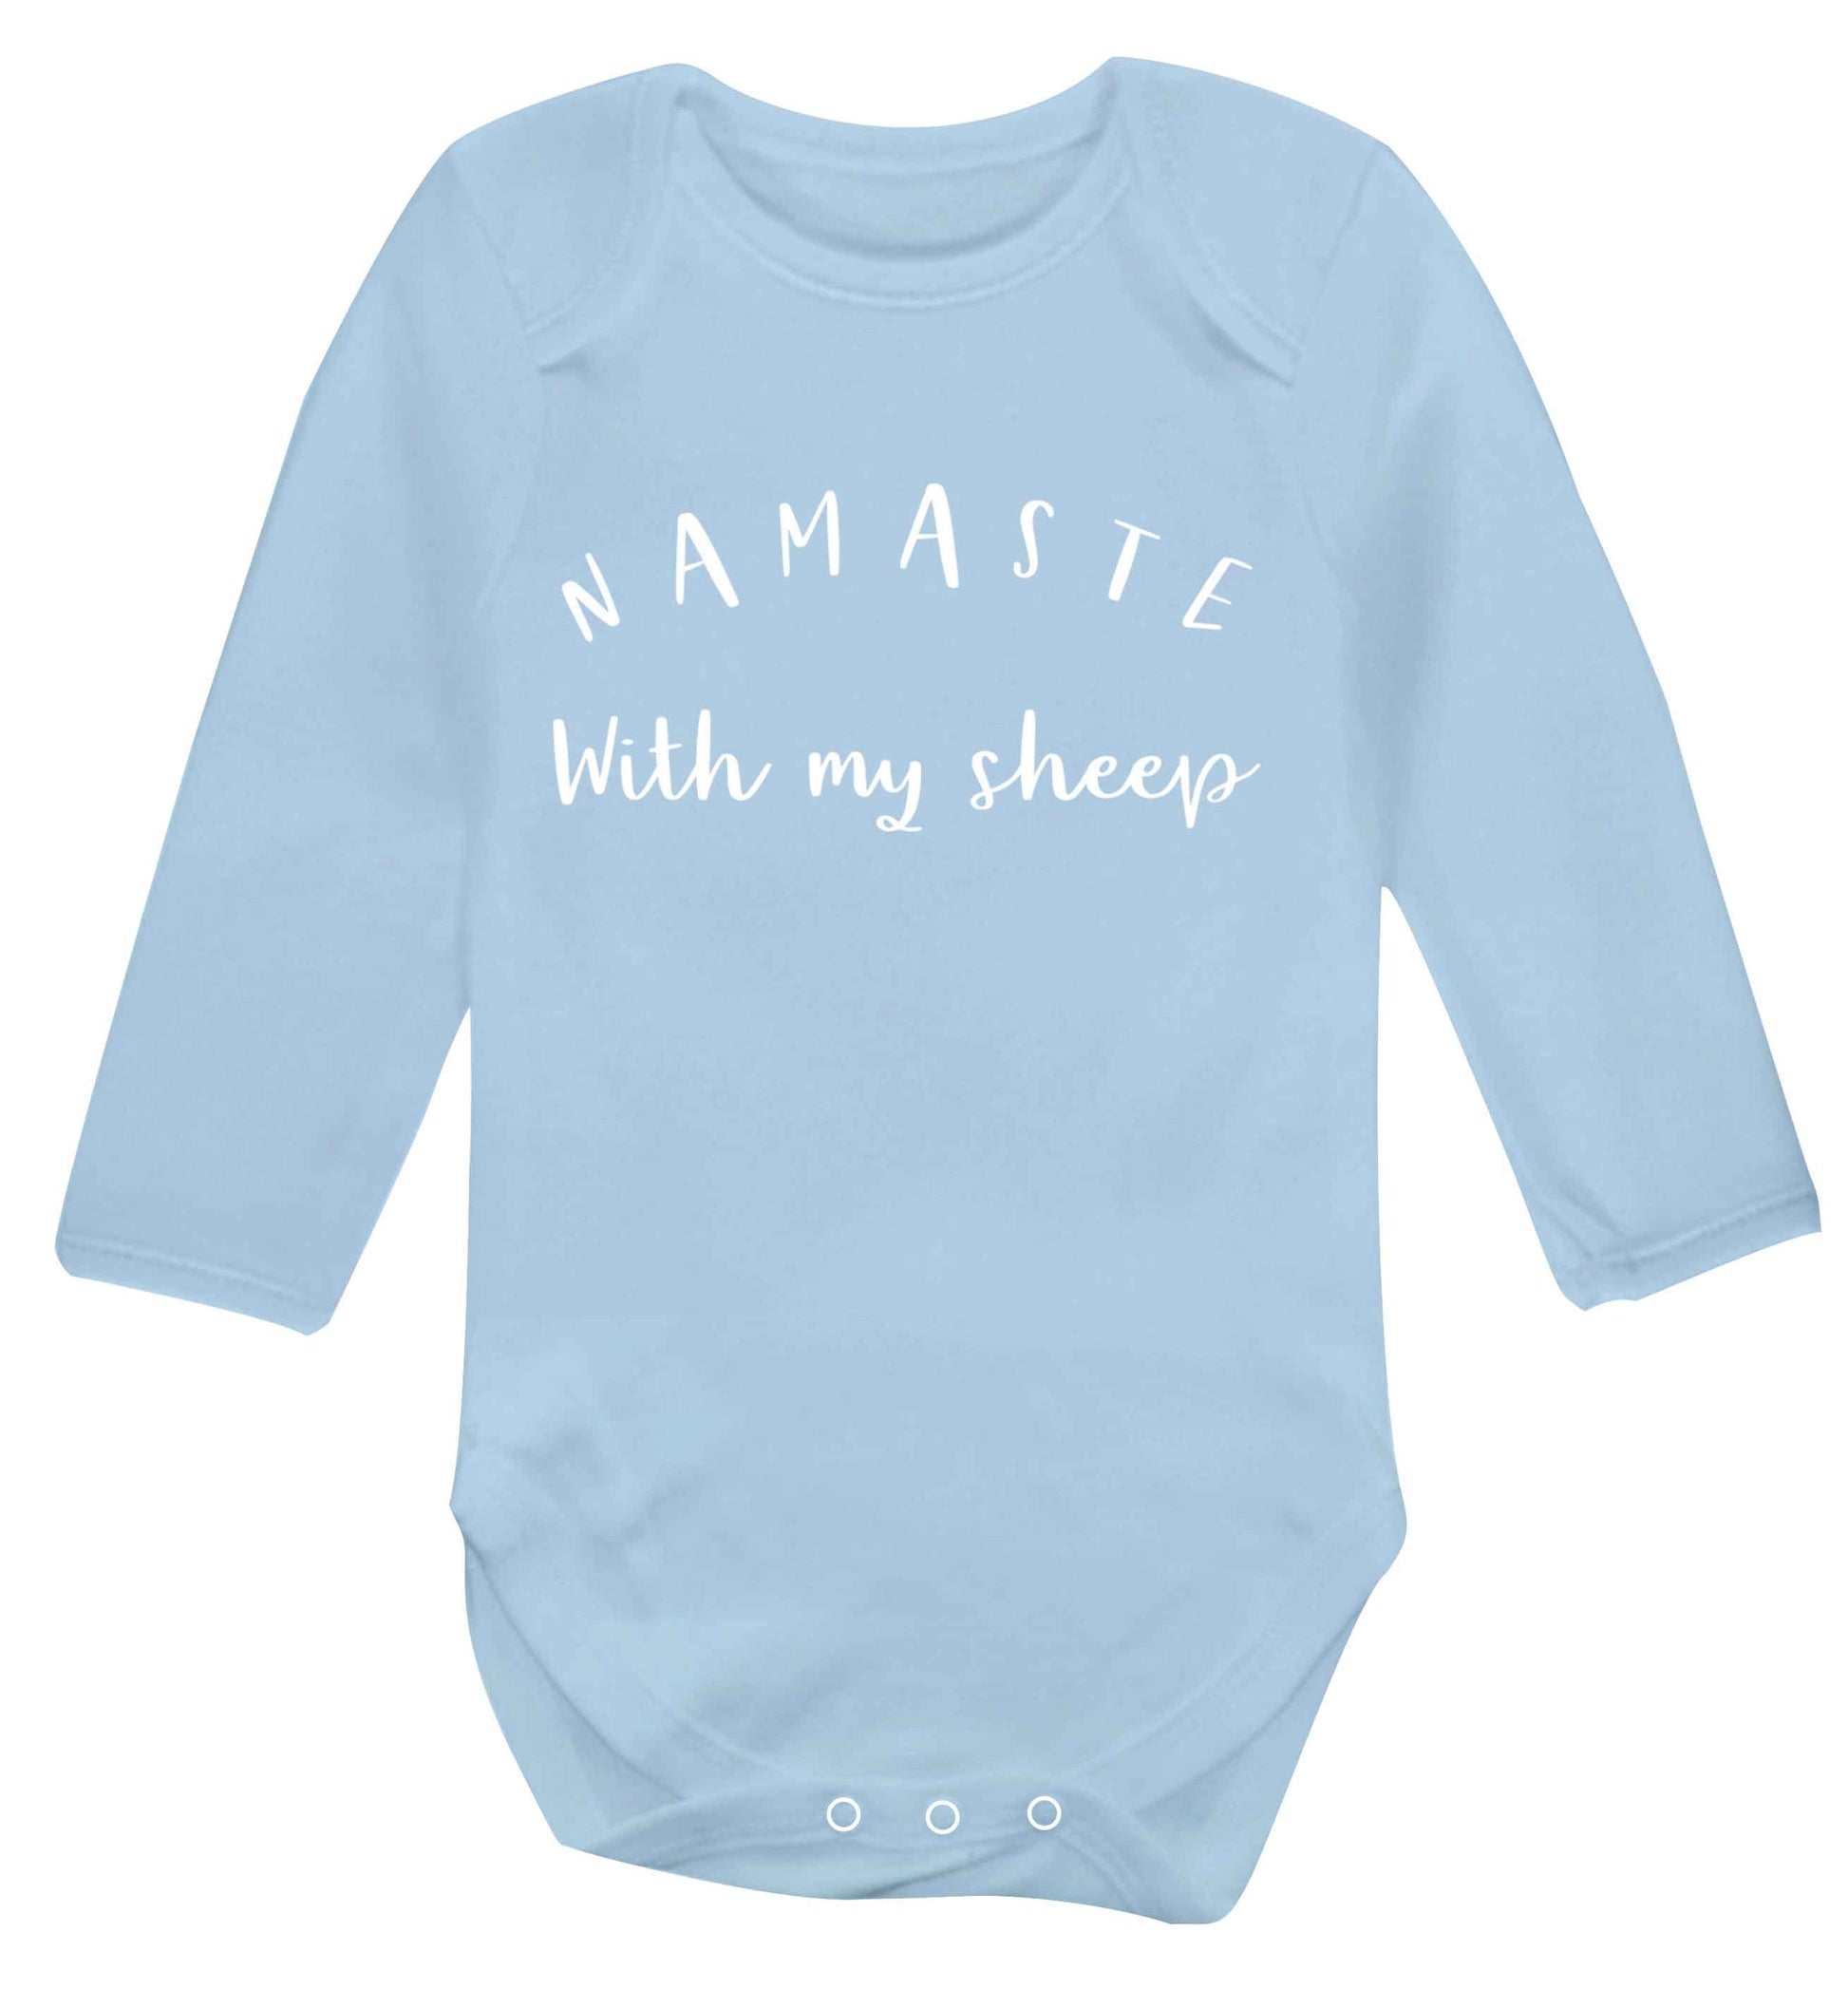 Namaste with my sheep Baby Vest long sleeved pale blue 6-12 months